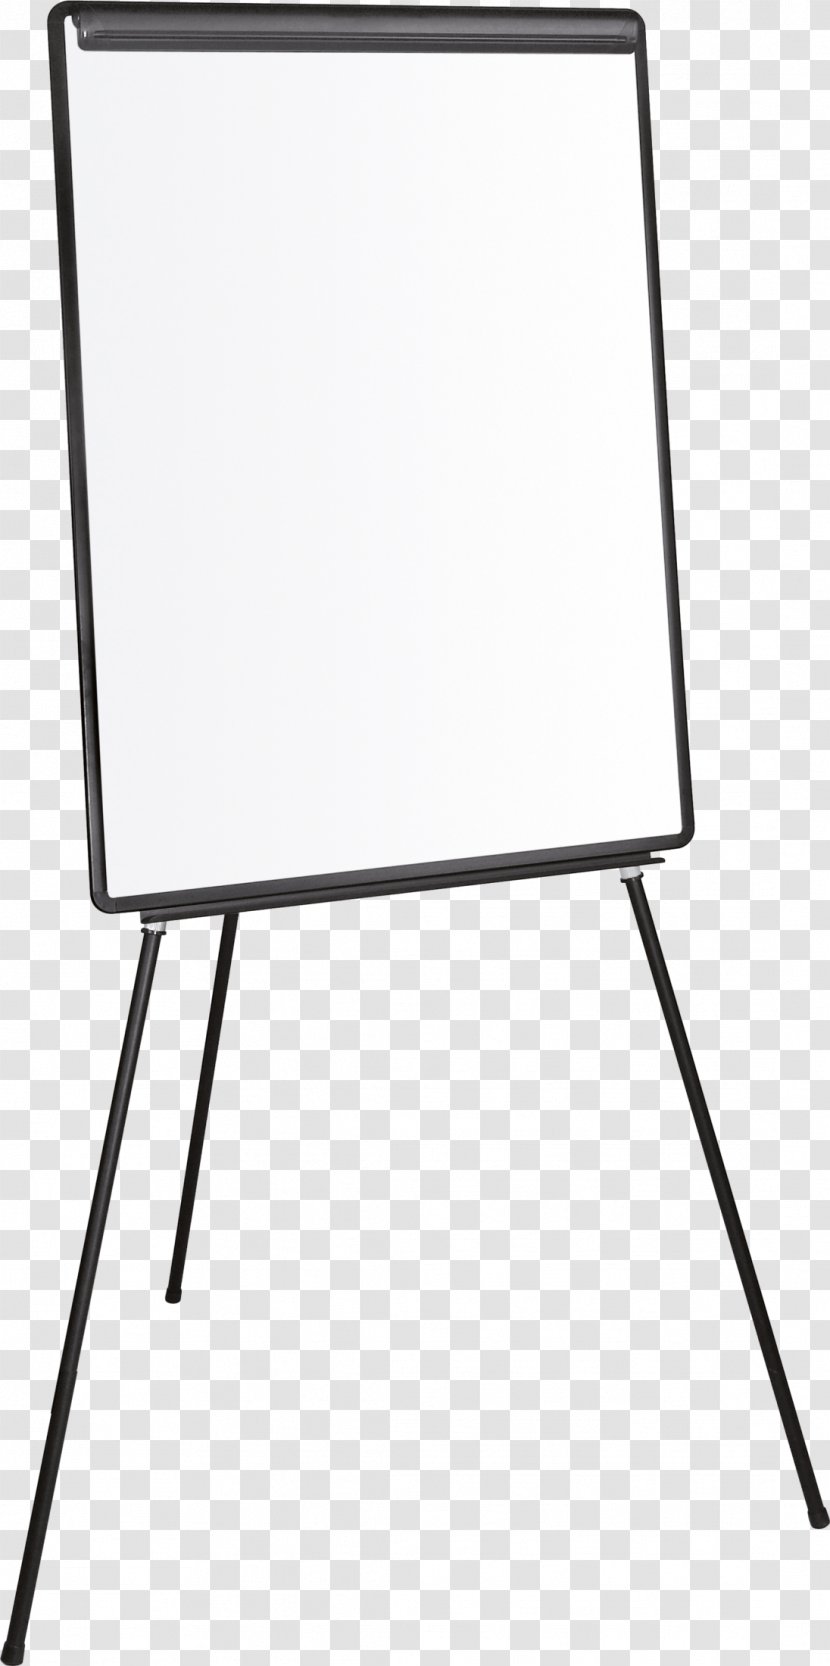 Easel Flip Chart Tripod Computer Monitor Accessory Dry-Erase Boards - Eraser And Hand Whiteboard Transparent PNG